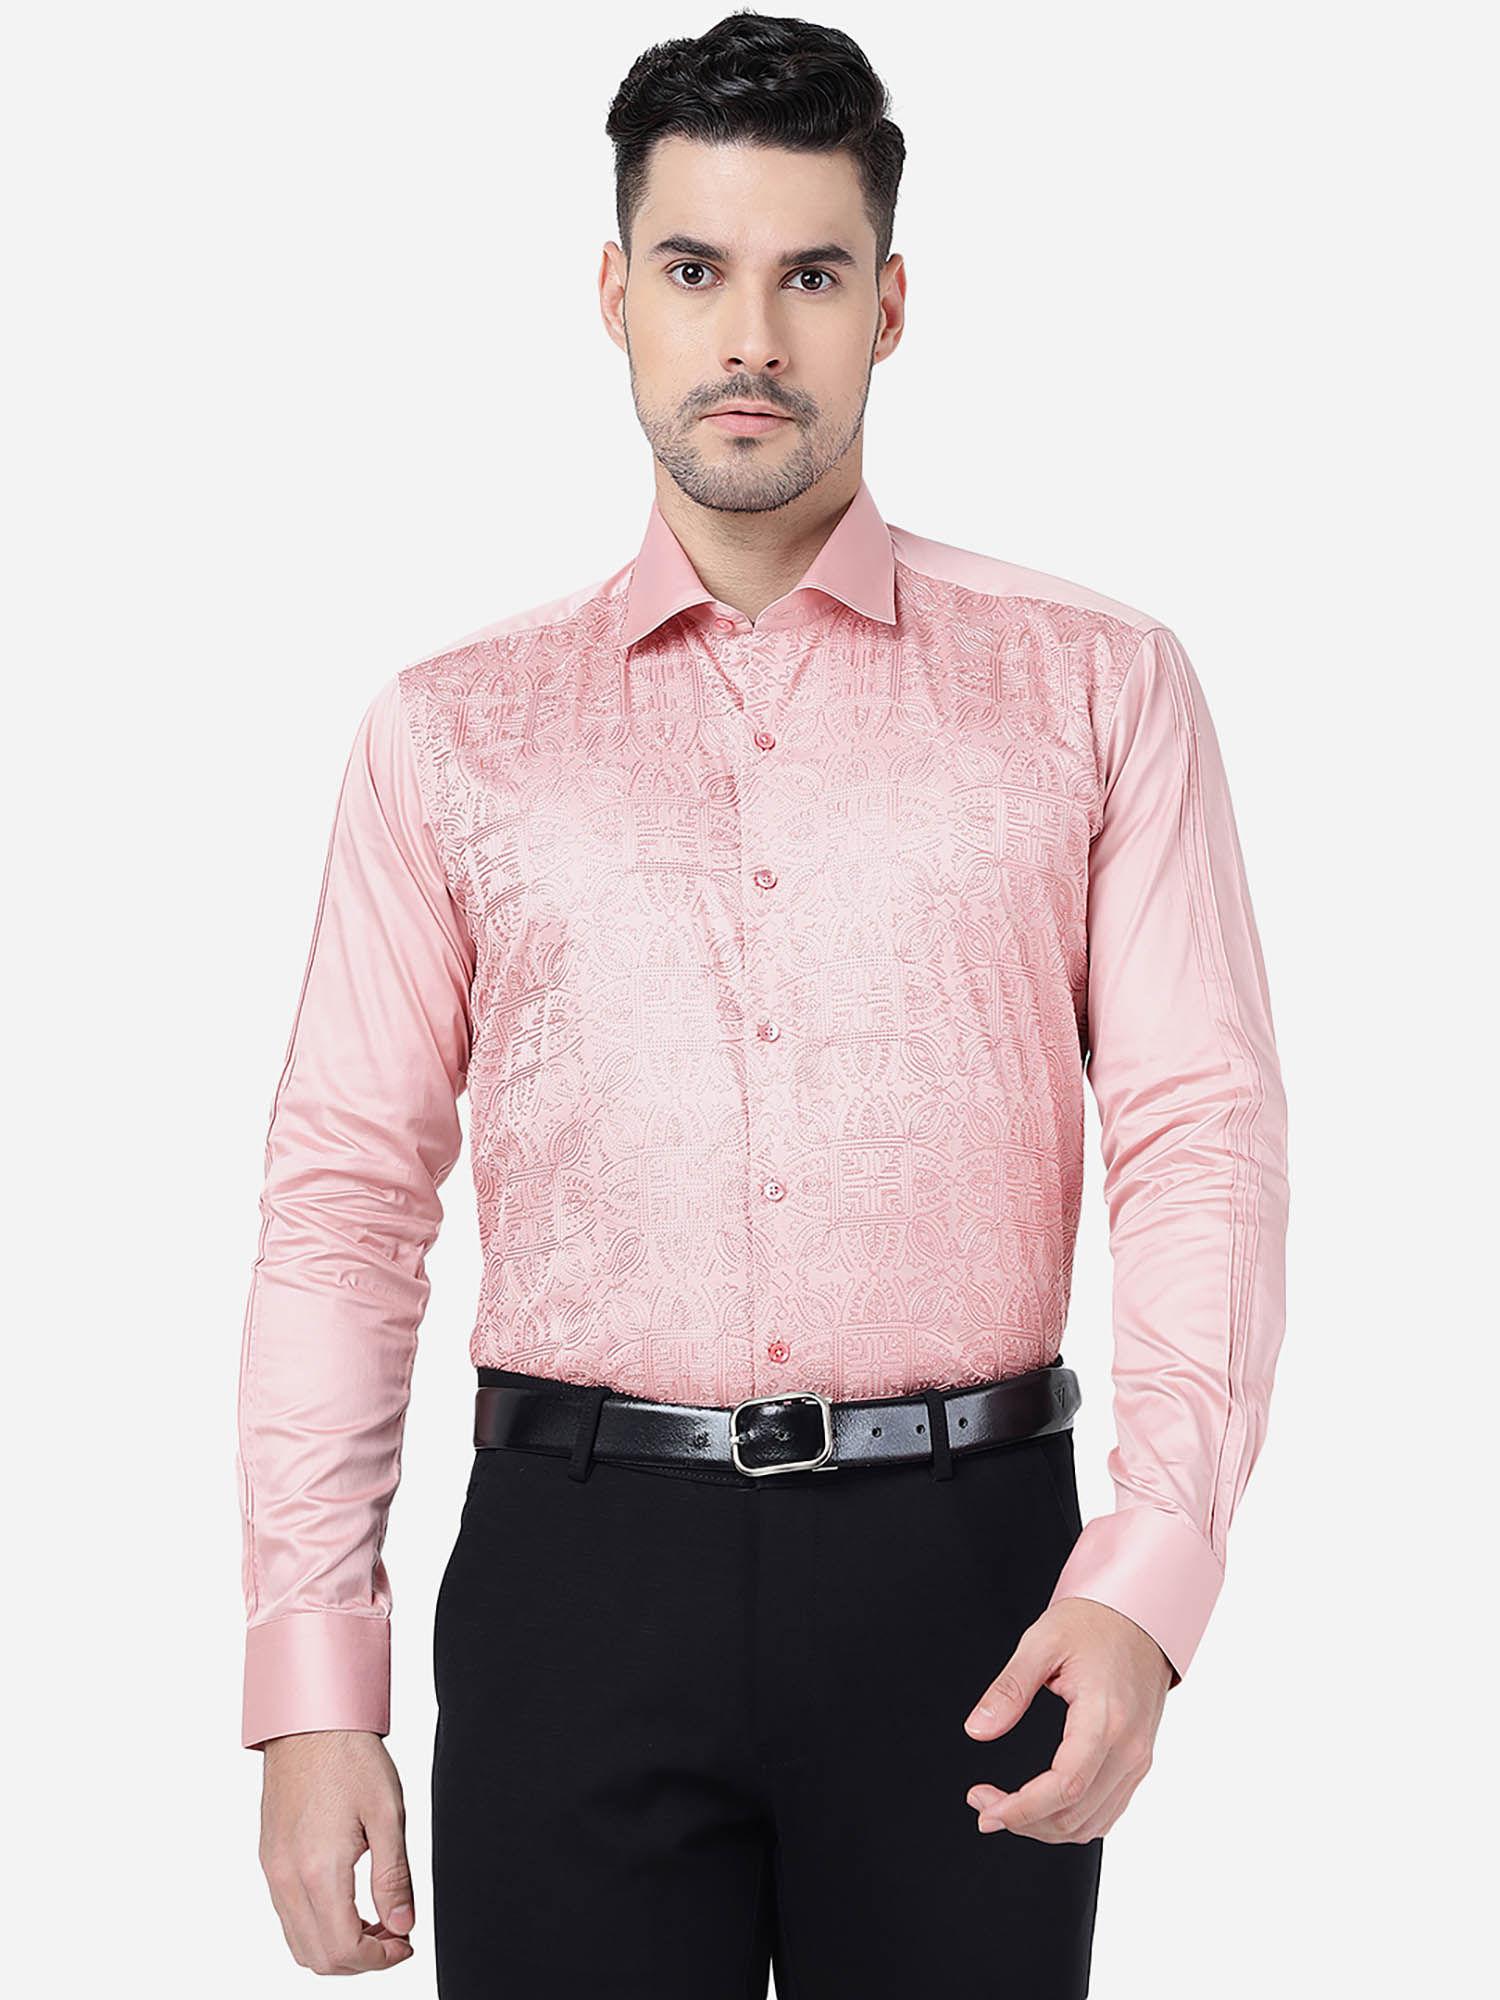 jb peach 100% cotton slim fit embroidered formal party wear shirt